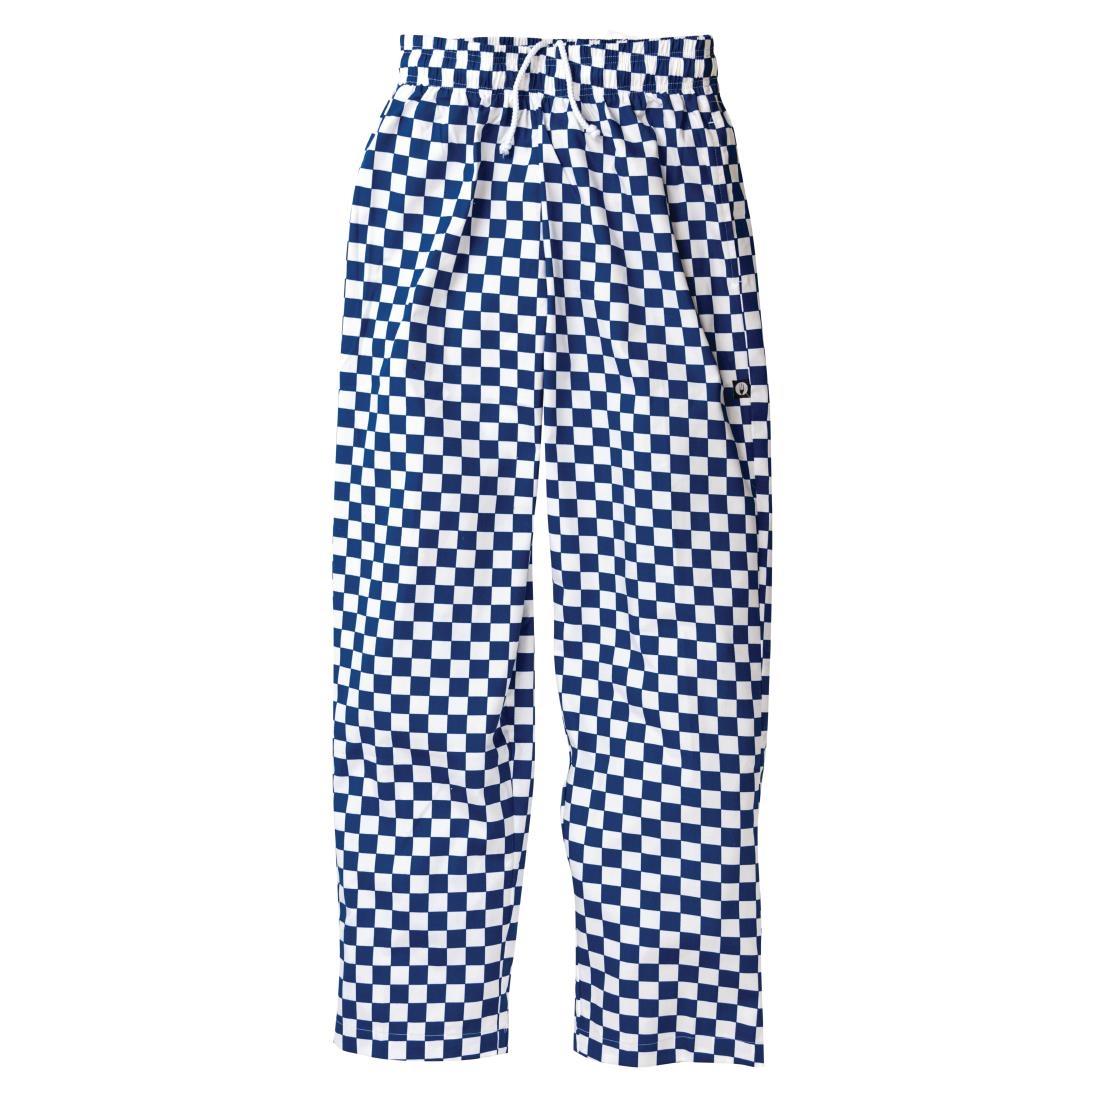 Chef Works Essential Baggy Pants Big Blue Check XS - A043-XS  - 3